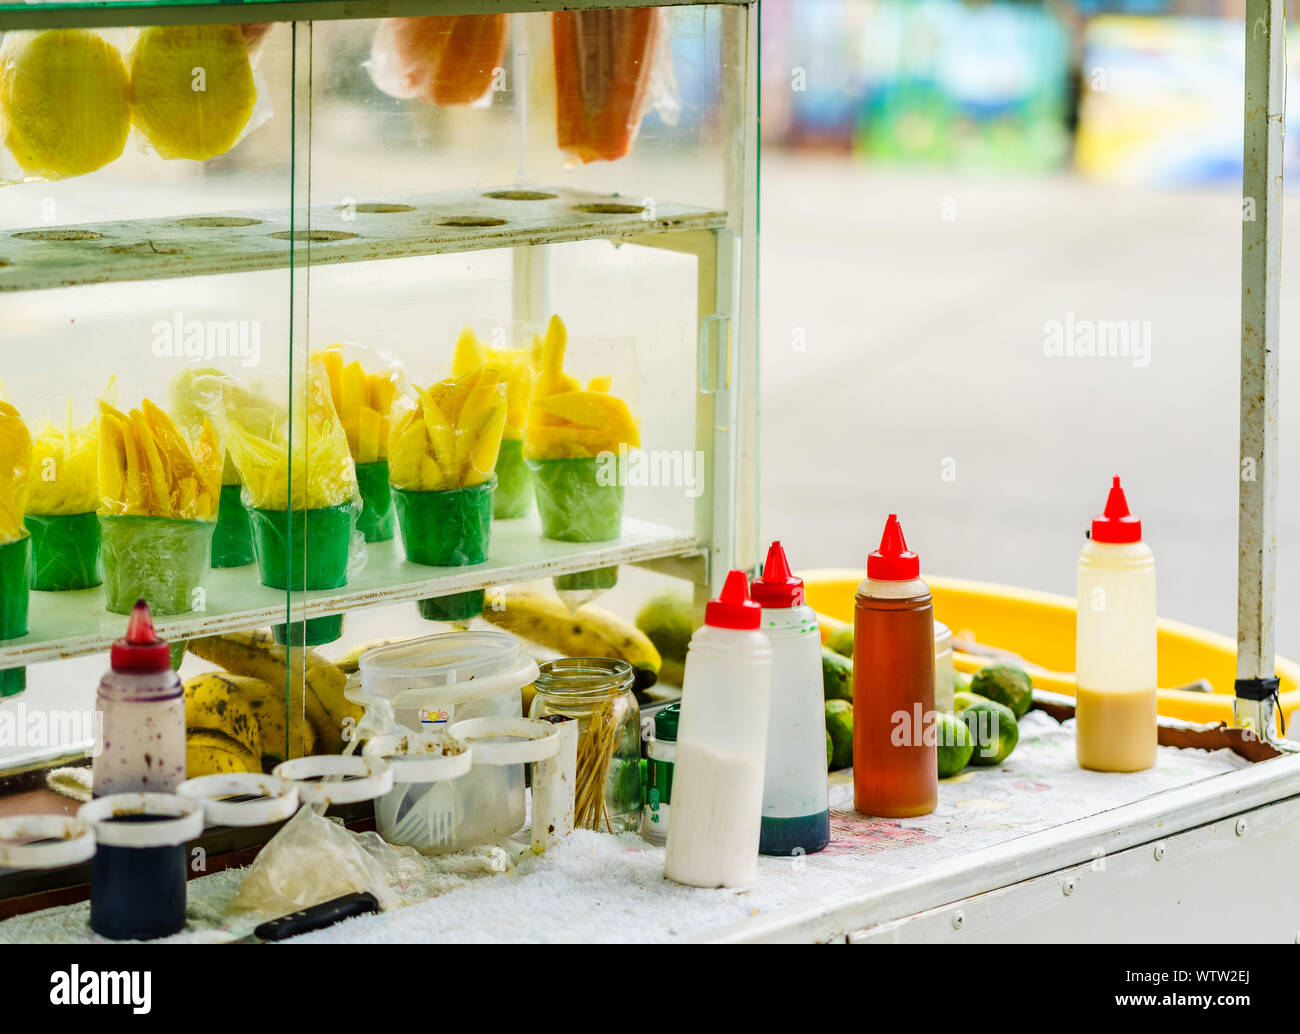 View on street food shop selling fruits in Colombia Stock Photo